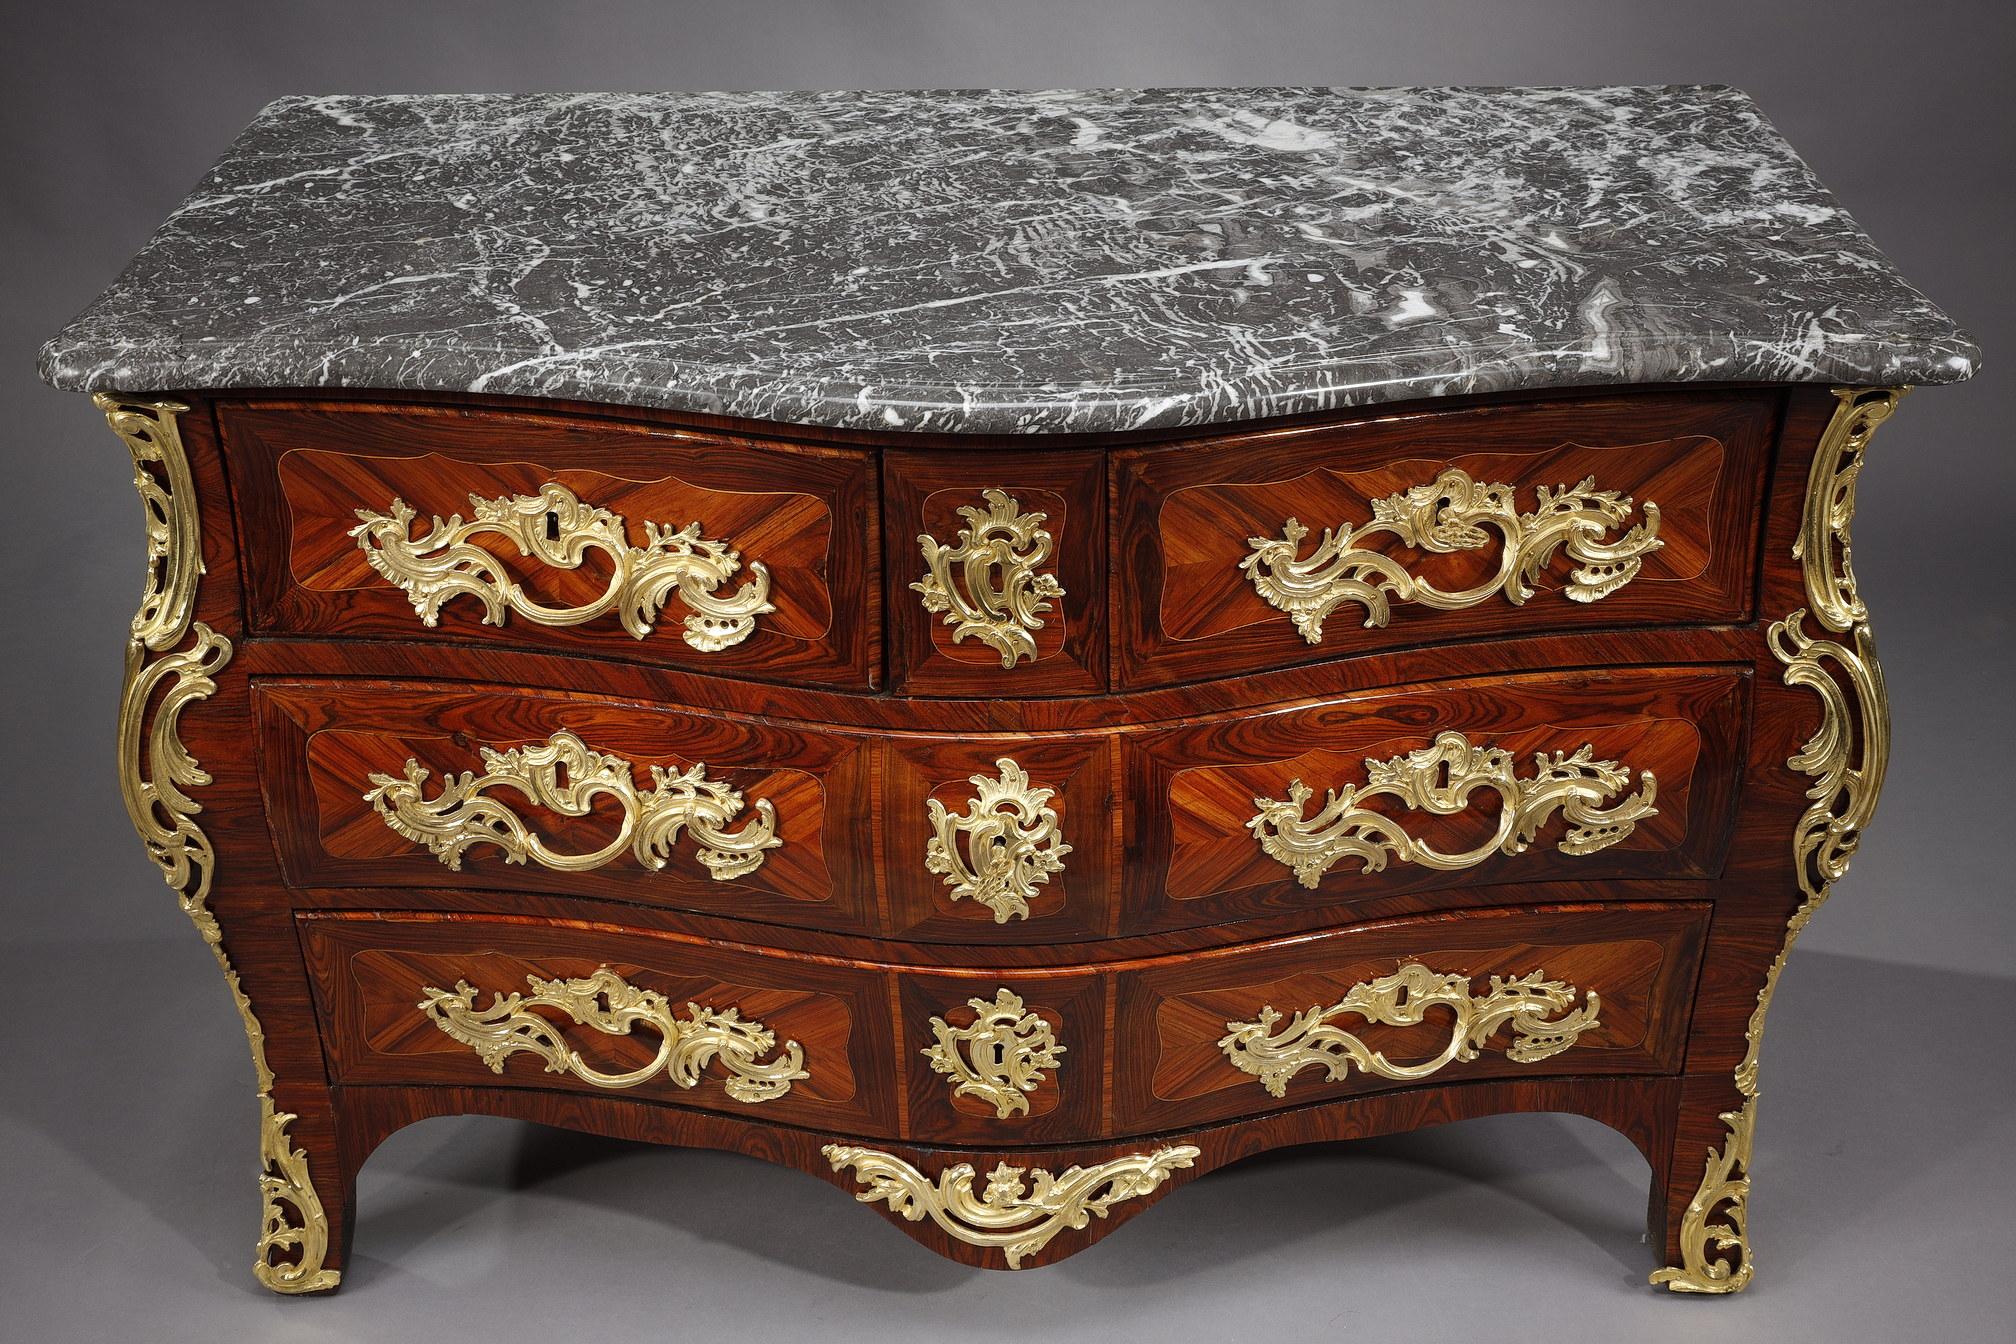 Louis XV period chest of drawers in wood veneer. The front
opens up to five drawers on three rows. It rests on straight legs. The piece is richly decorated with ormolu and chiseled rocaille on the entrances of the lock, the handles of the drawers